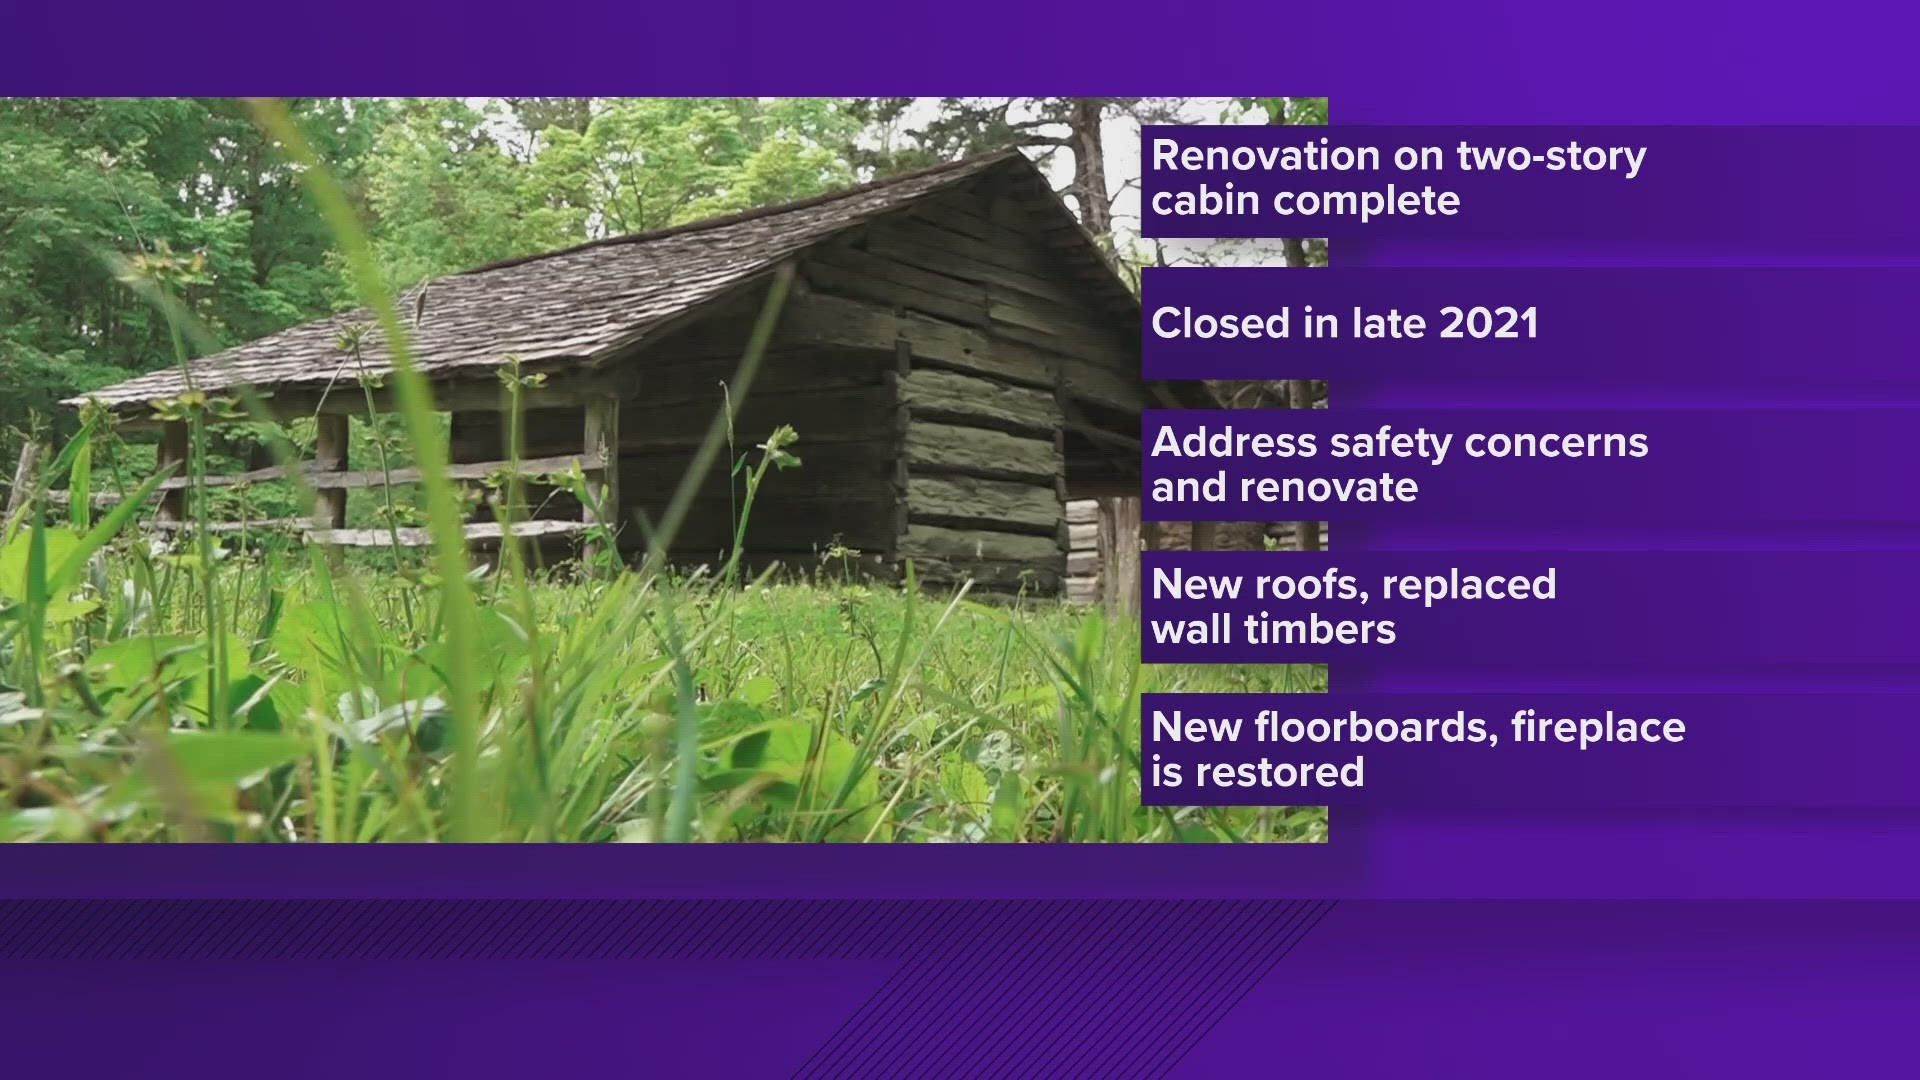 The park said it closed the two-story cabin in late 2021 while its Forever Places crew addressed safety concerns and completed renovations.